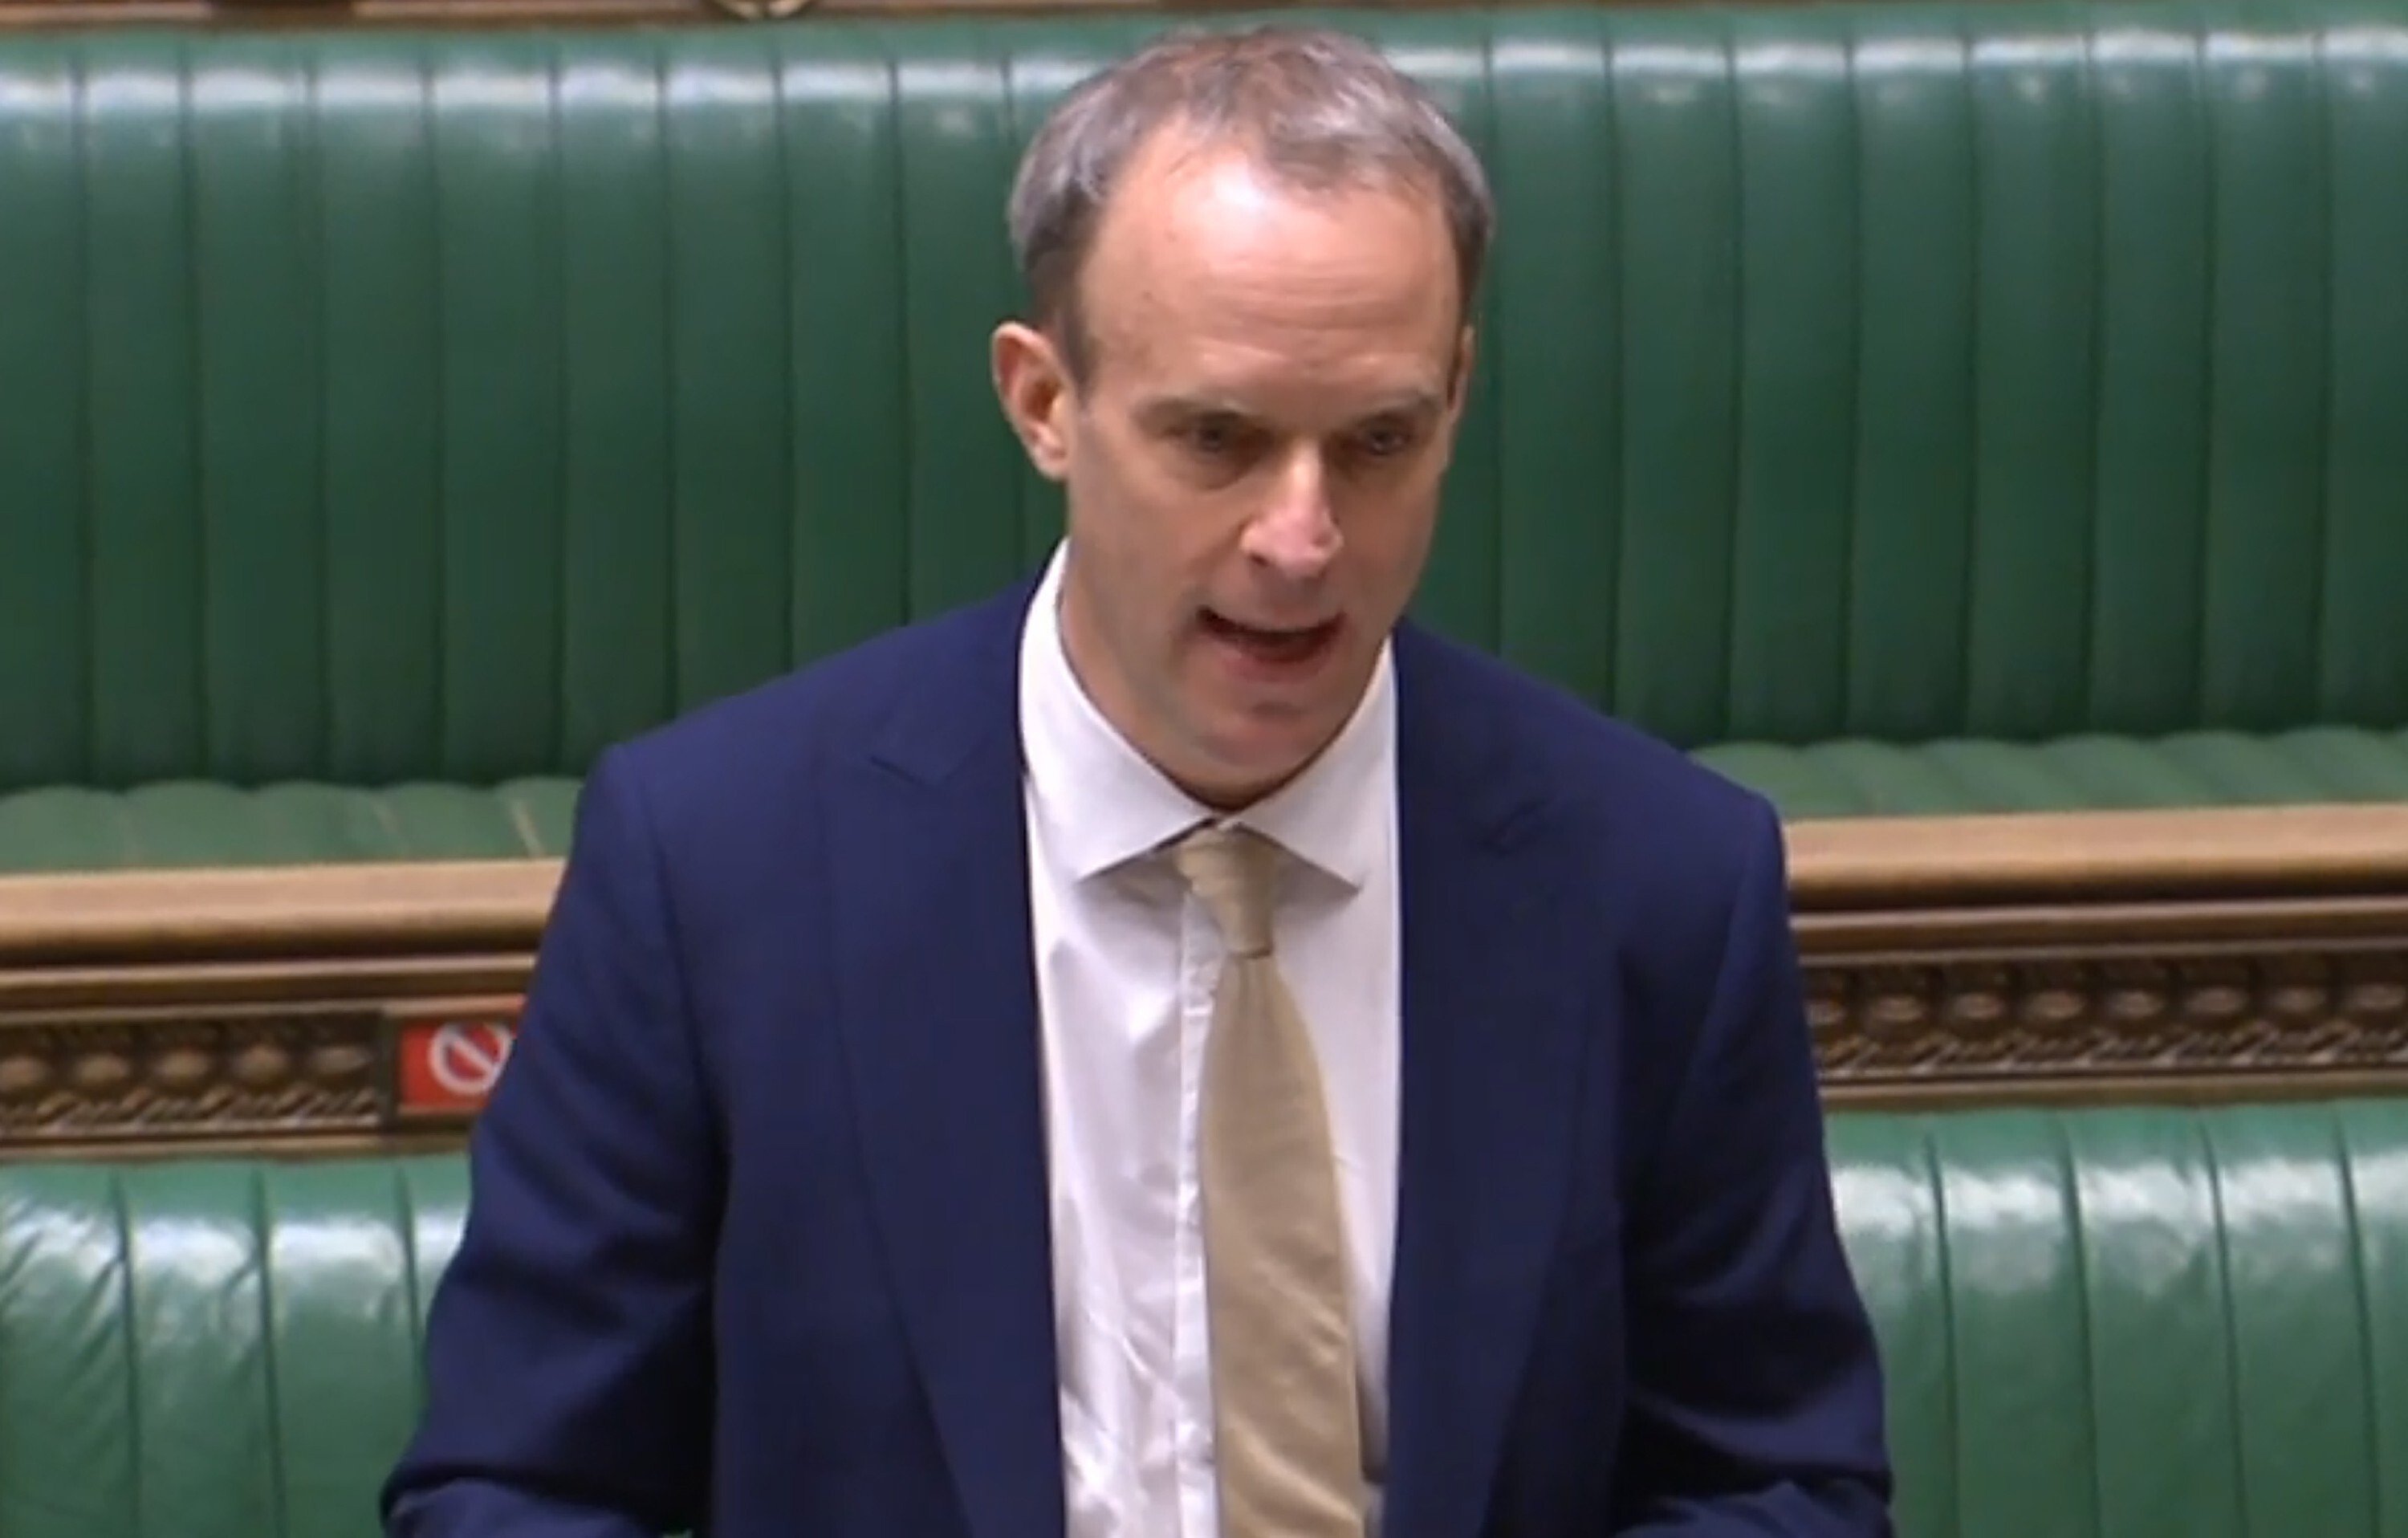 Britain's Foreign Secretary Dominic Raab discussing new trade measures in response to alleged Chinese human rights violations against its Uygur minority in a socially distanced session at the House of Commons in London on Tuesday. Photo: Parliamentary Recording Unit via AFP